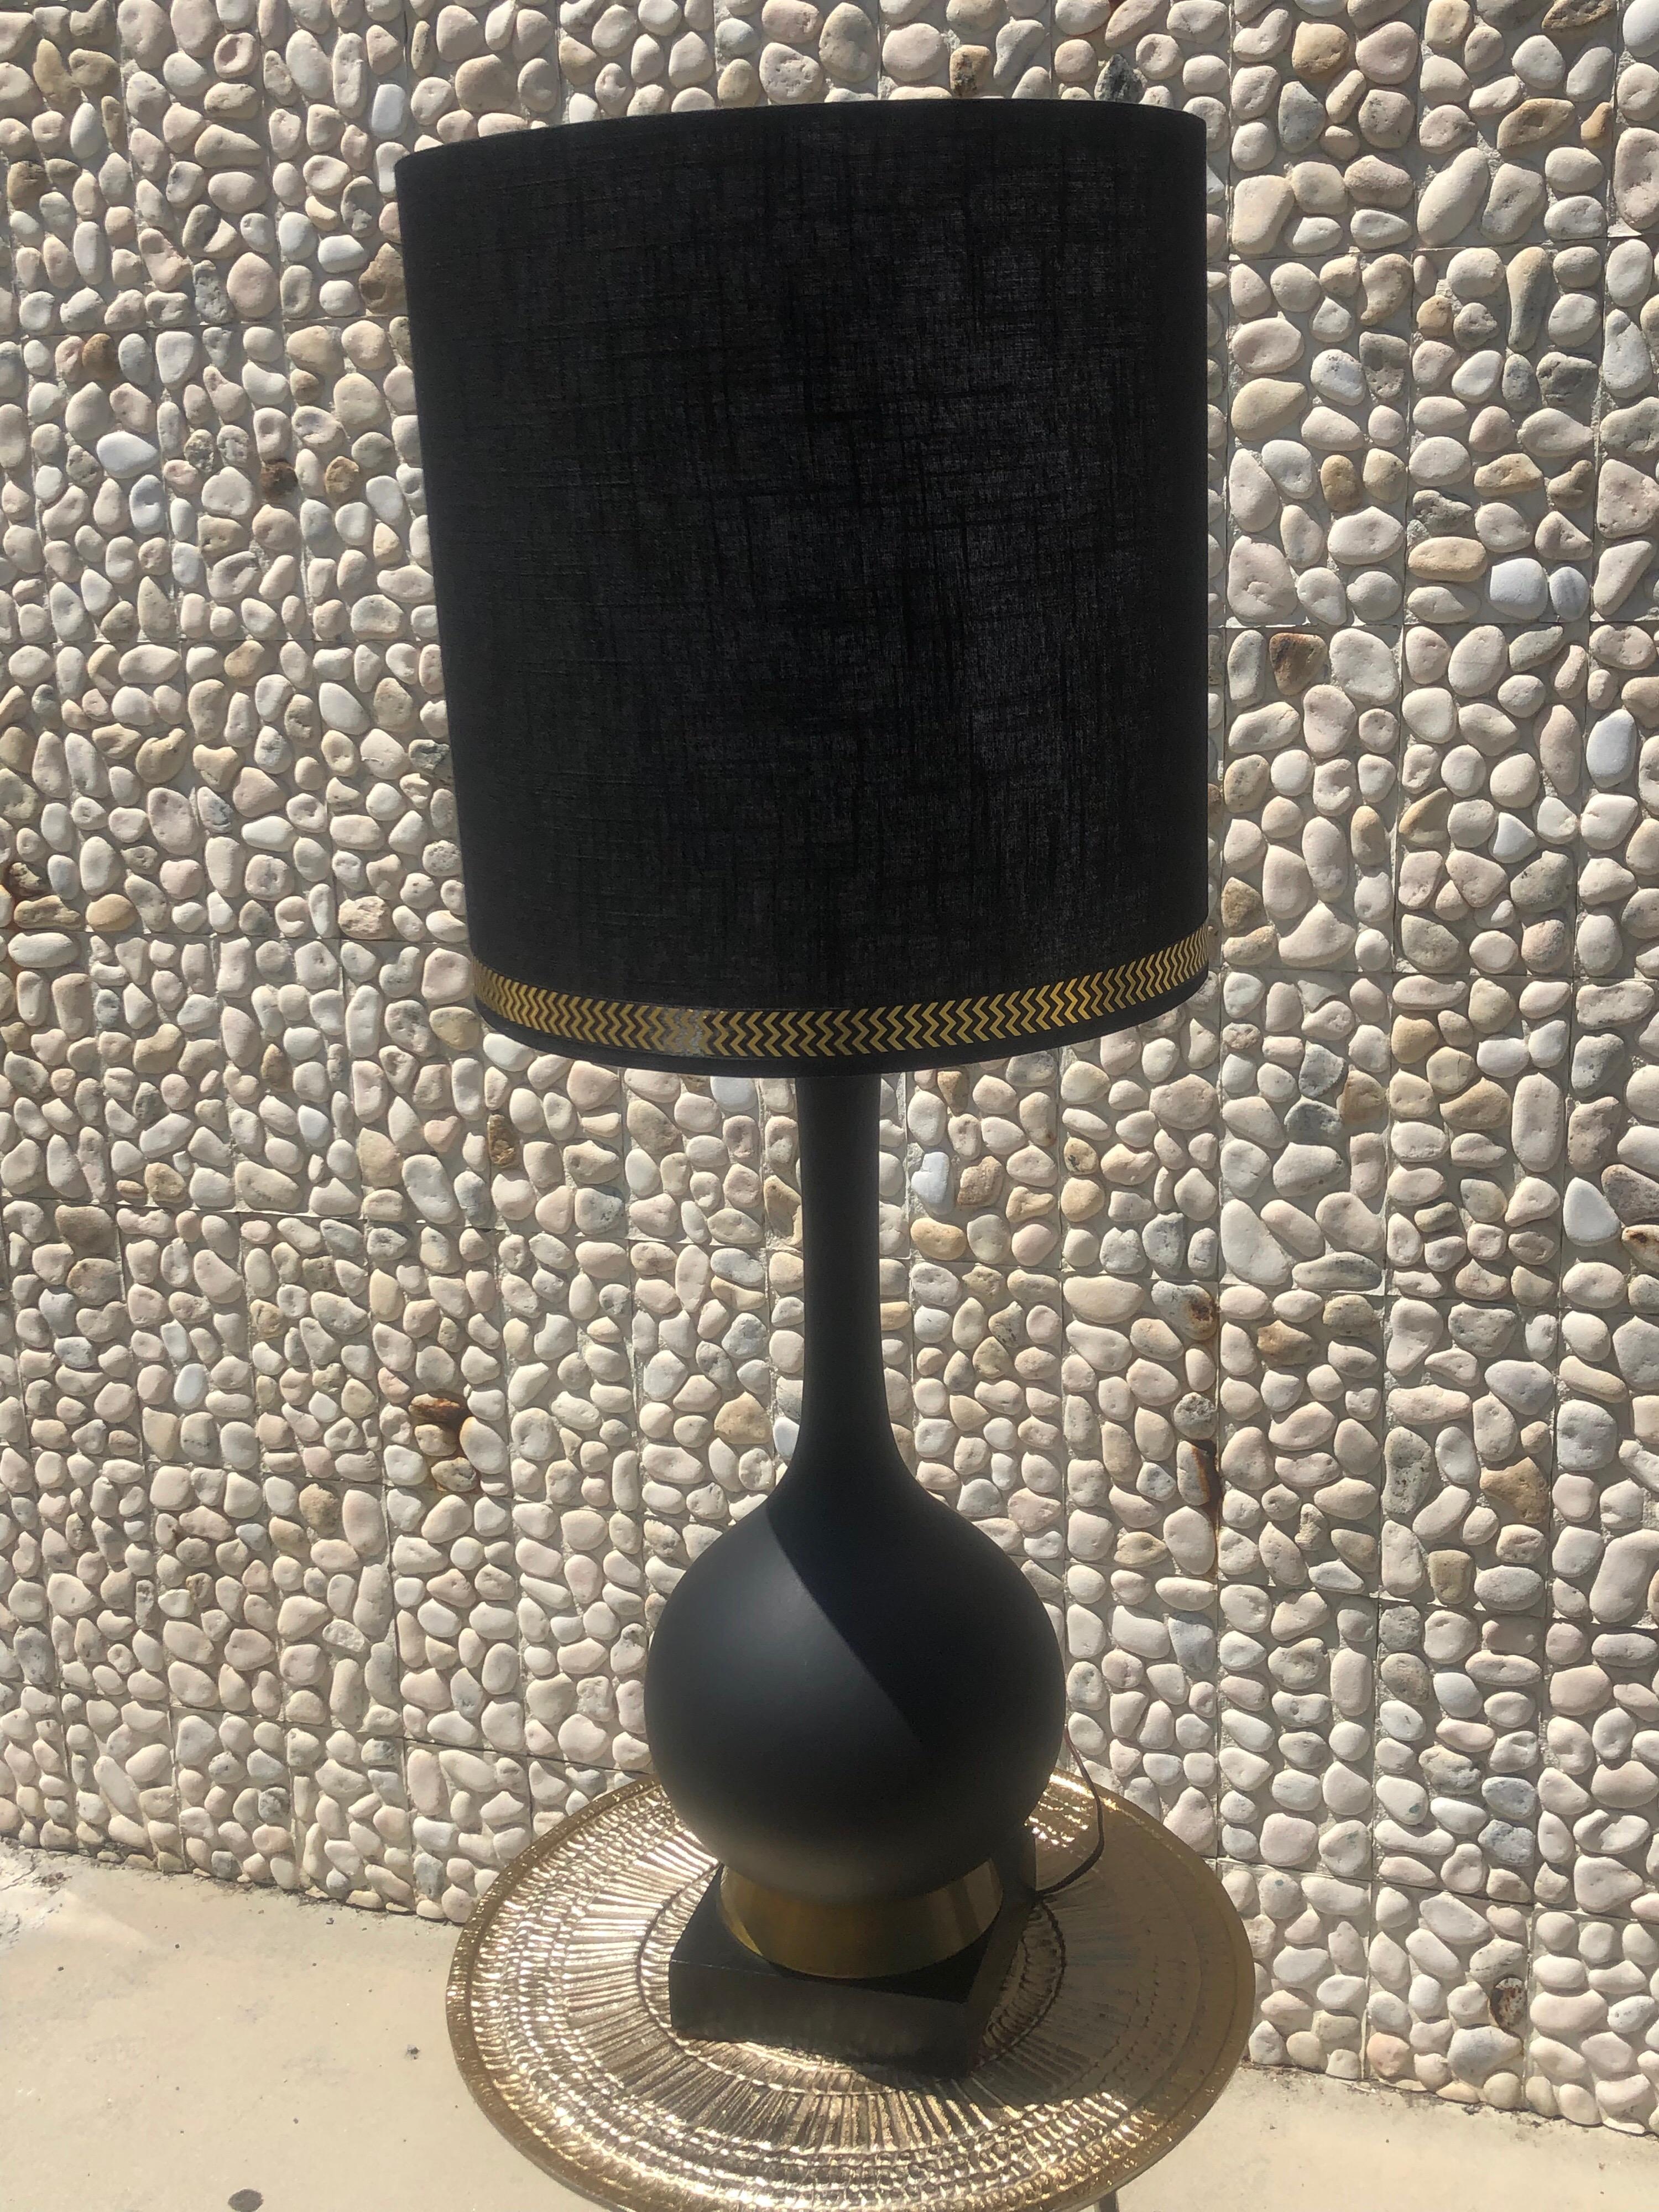 These beautiful midcentury Italian lamps cane from a vintage Palm Springs Estate. We have added a new custom black shade with metallic gold jacquard trim to accent the original brass trim on the bottom of the lamps. Matte black ceramic. Very chic